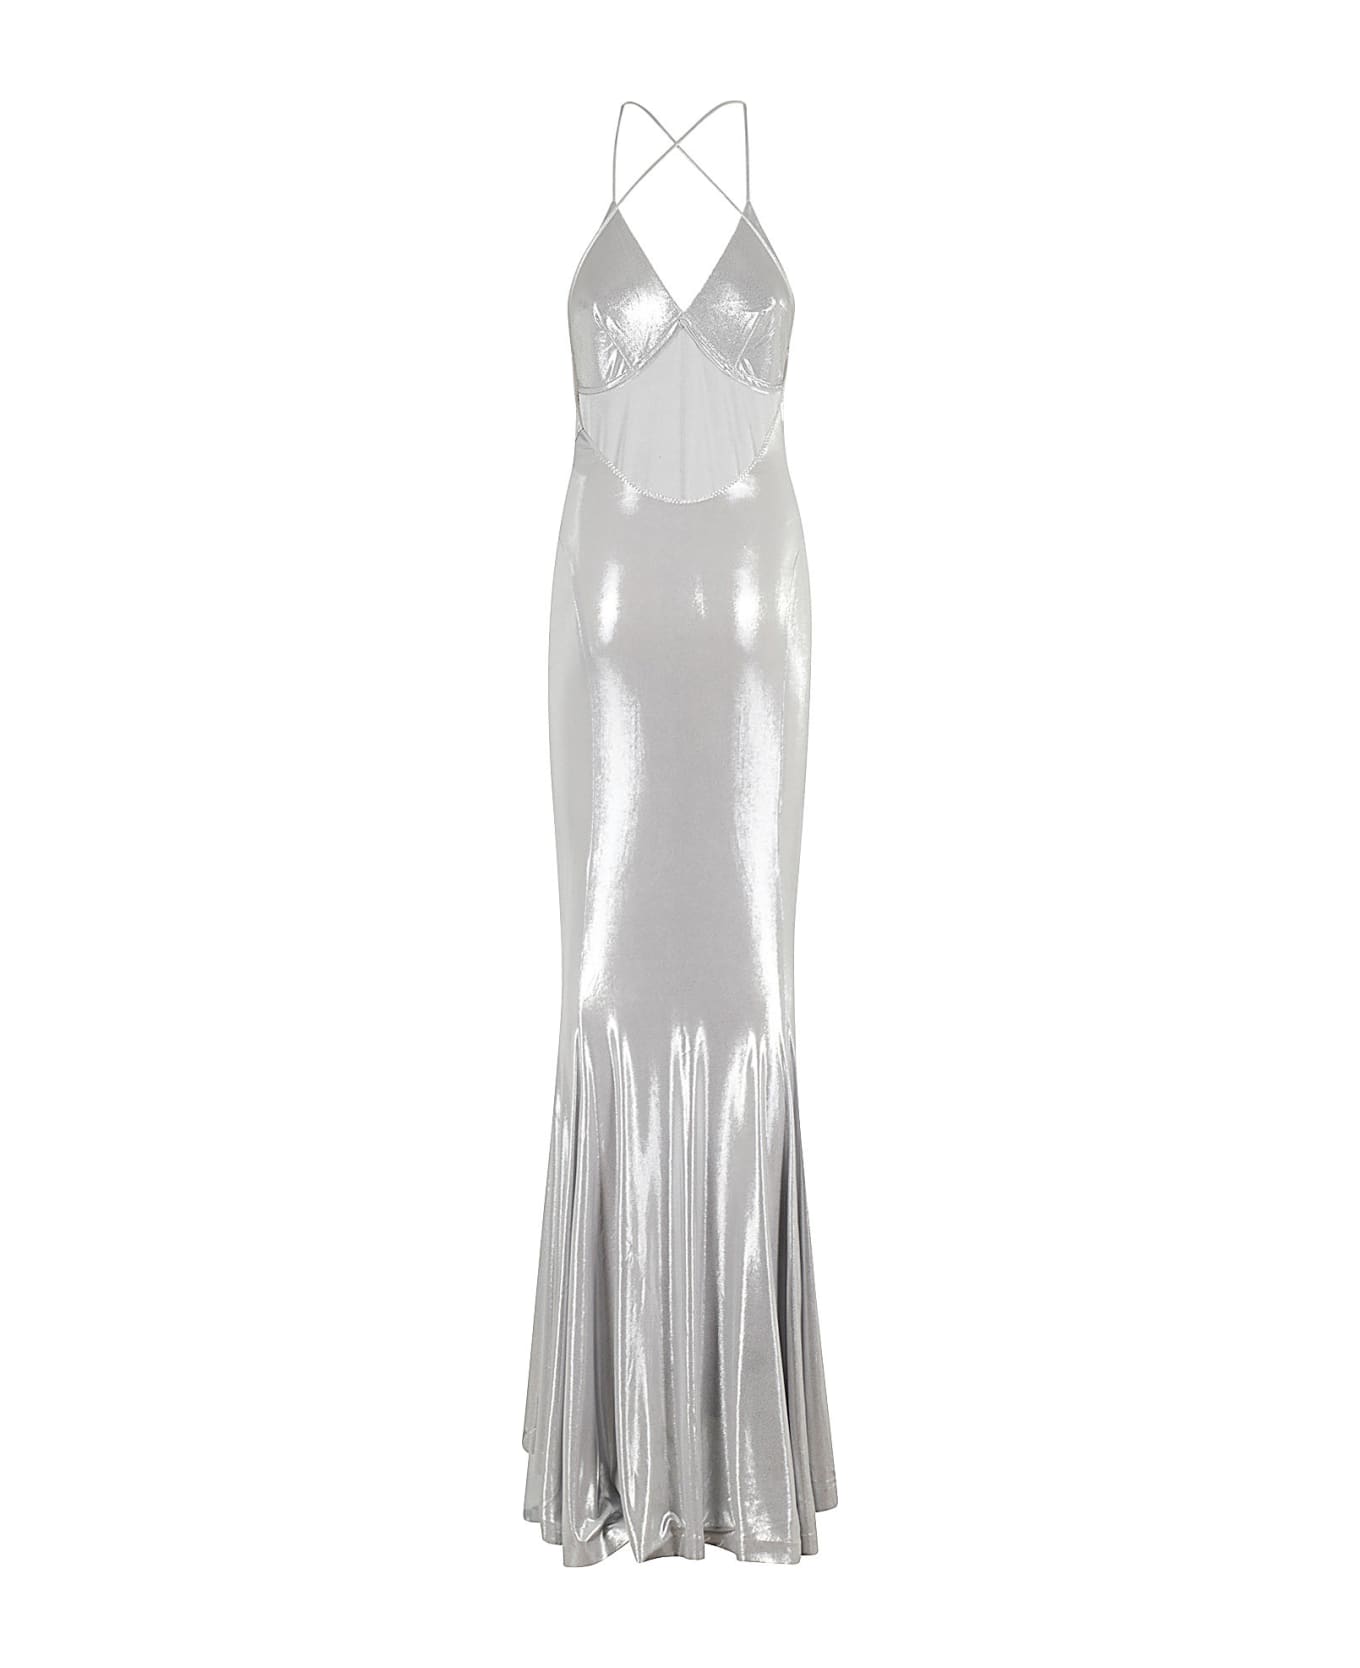 Norma Kamali Low Back Slip Fishtail Gown - Silver Silver